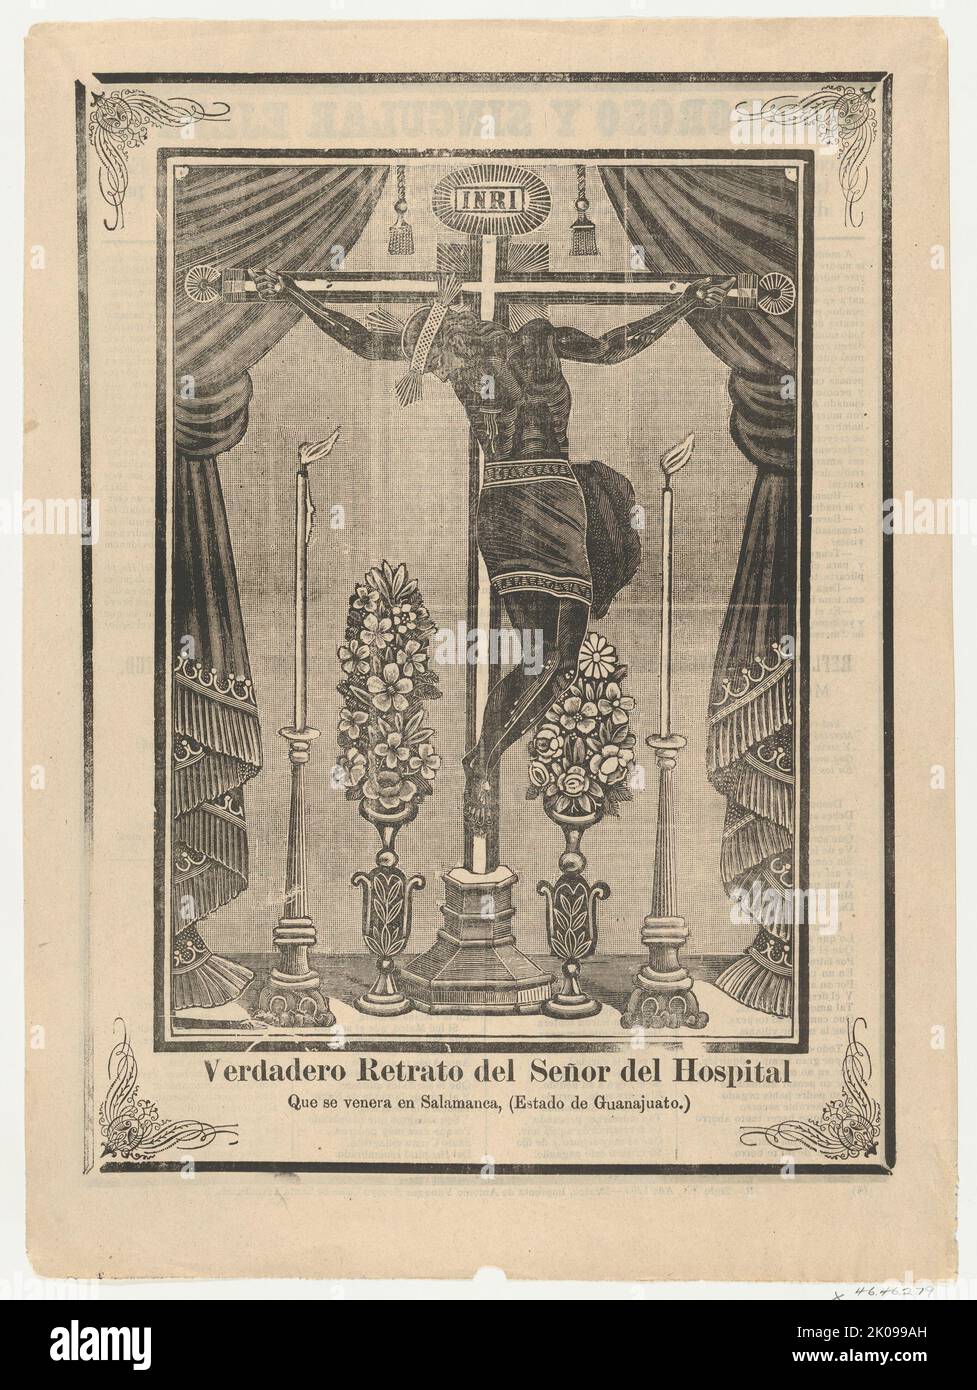 Broadsheet relating to Our Lord of the Hospital (Salamanca, Guanajuato) on a crucifix on an altar, 1903. Stock Photo